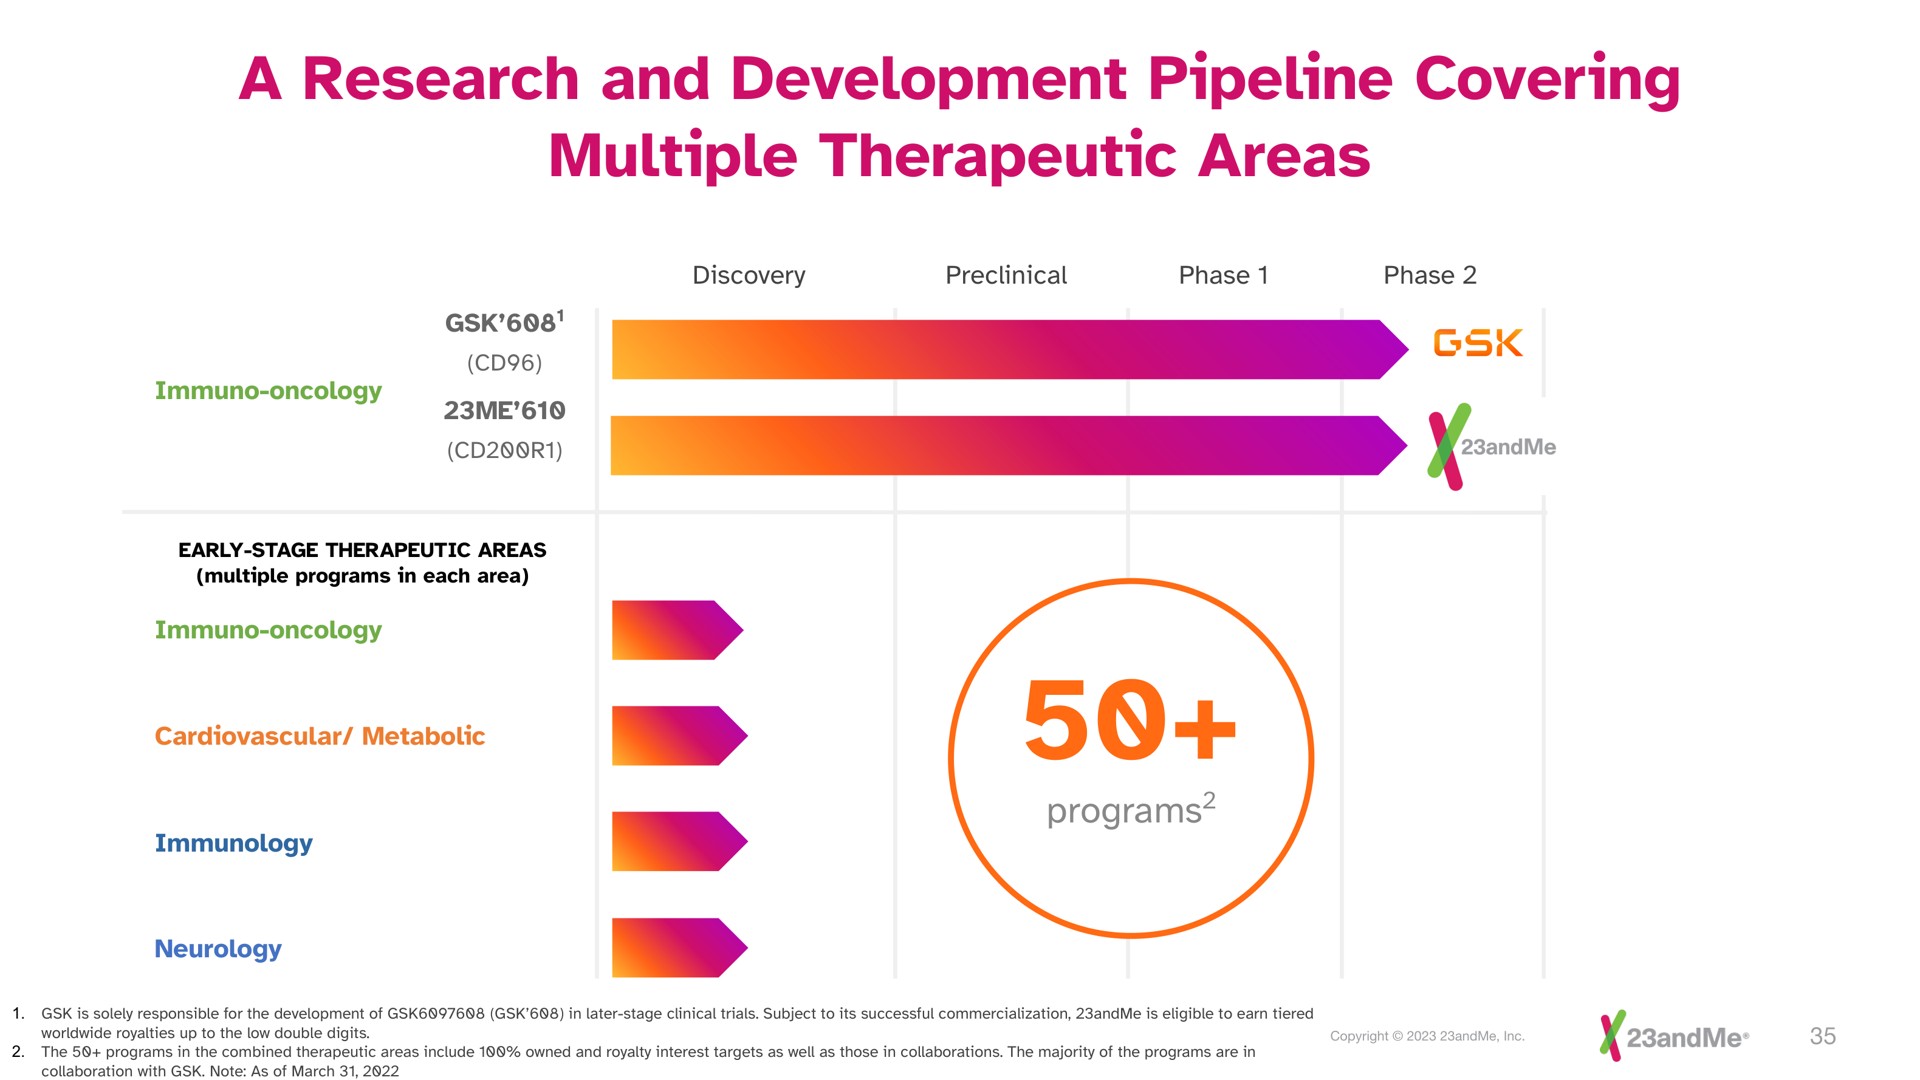 a research and development pipeline covering multiple therapeutic areas | 23andMe